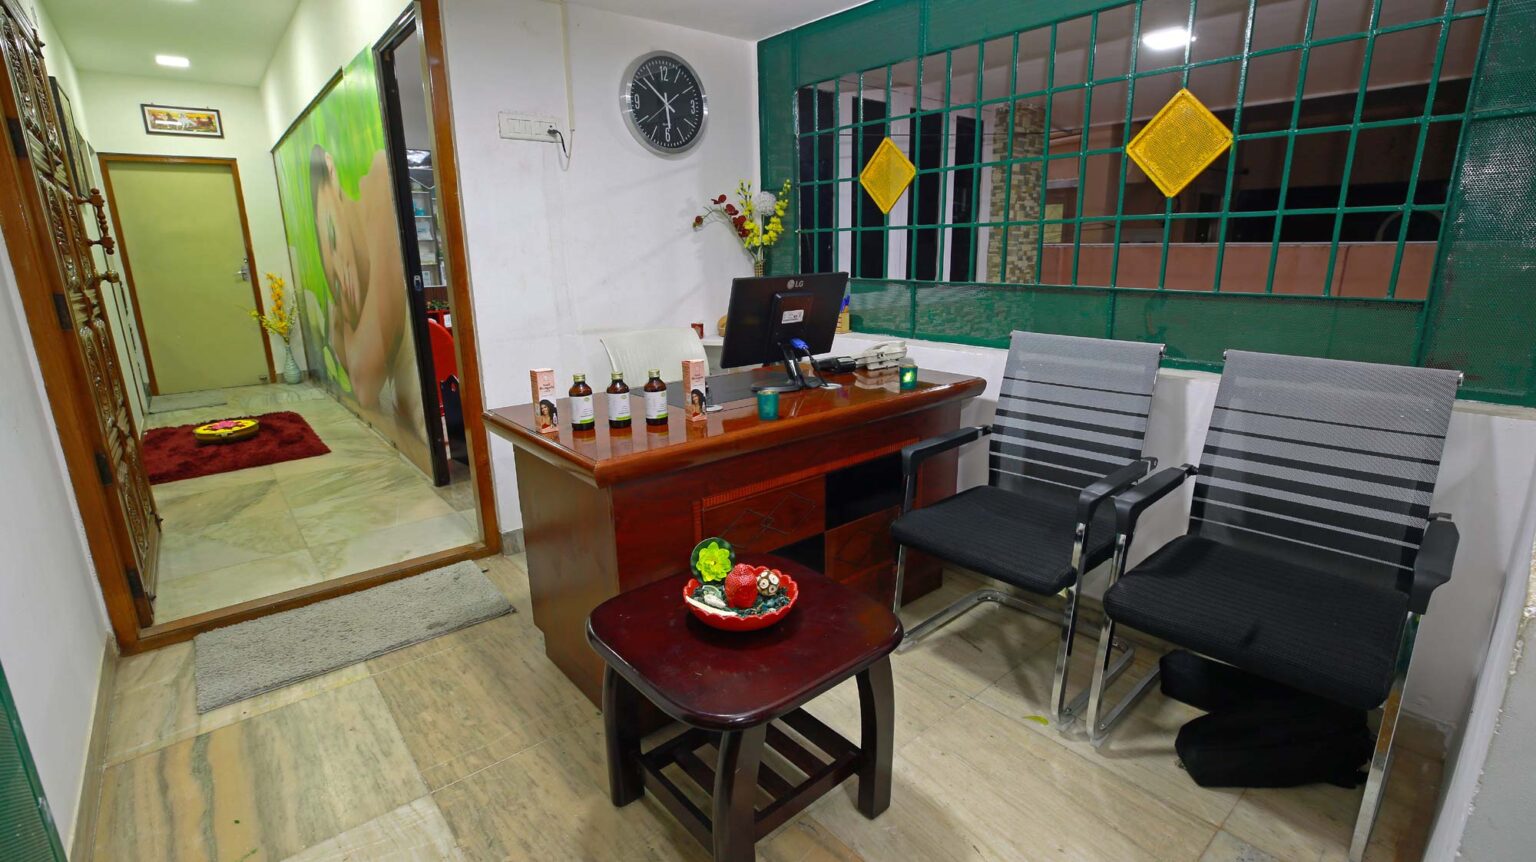 Room with comfortable chairs ,table, computer, display oils, carpet and windows for ventilation. Come, have a look at the products that we use for Spa massage at the welcome room of the City's best Ayurvedic and Spa Massage parlour, The Riverday Spa